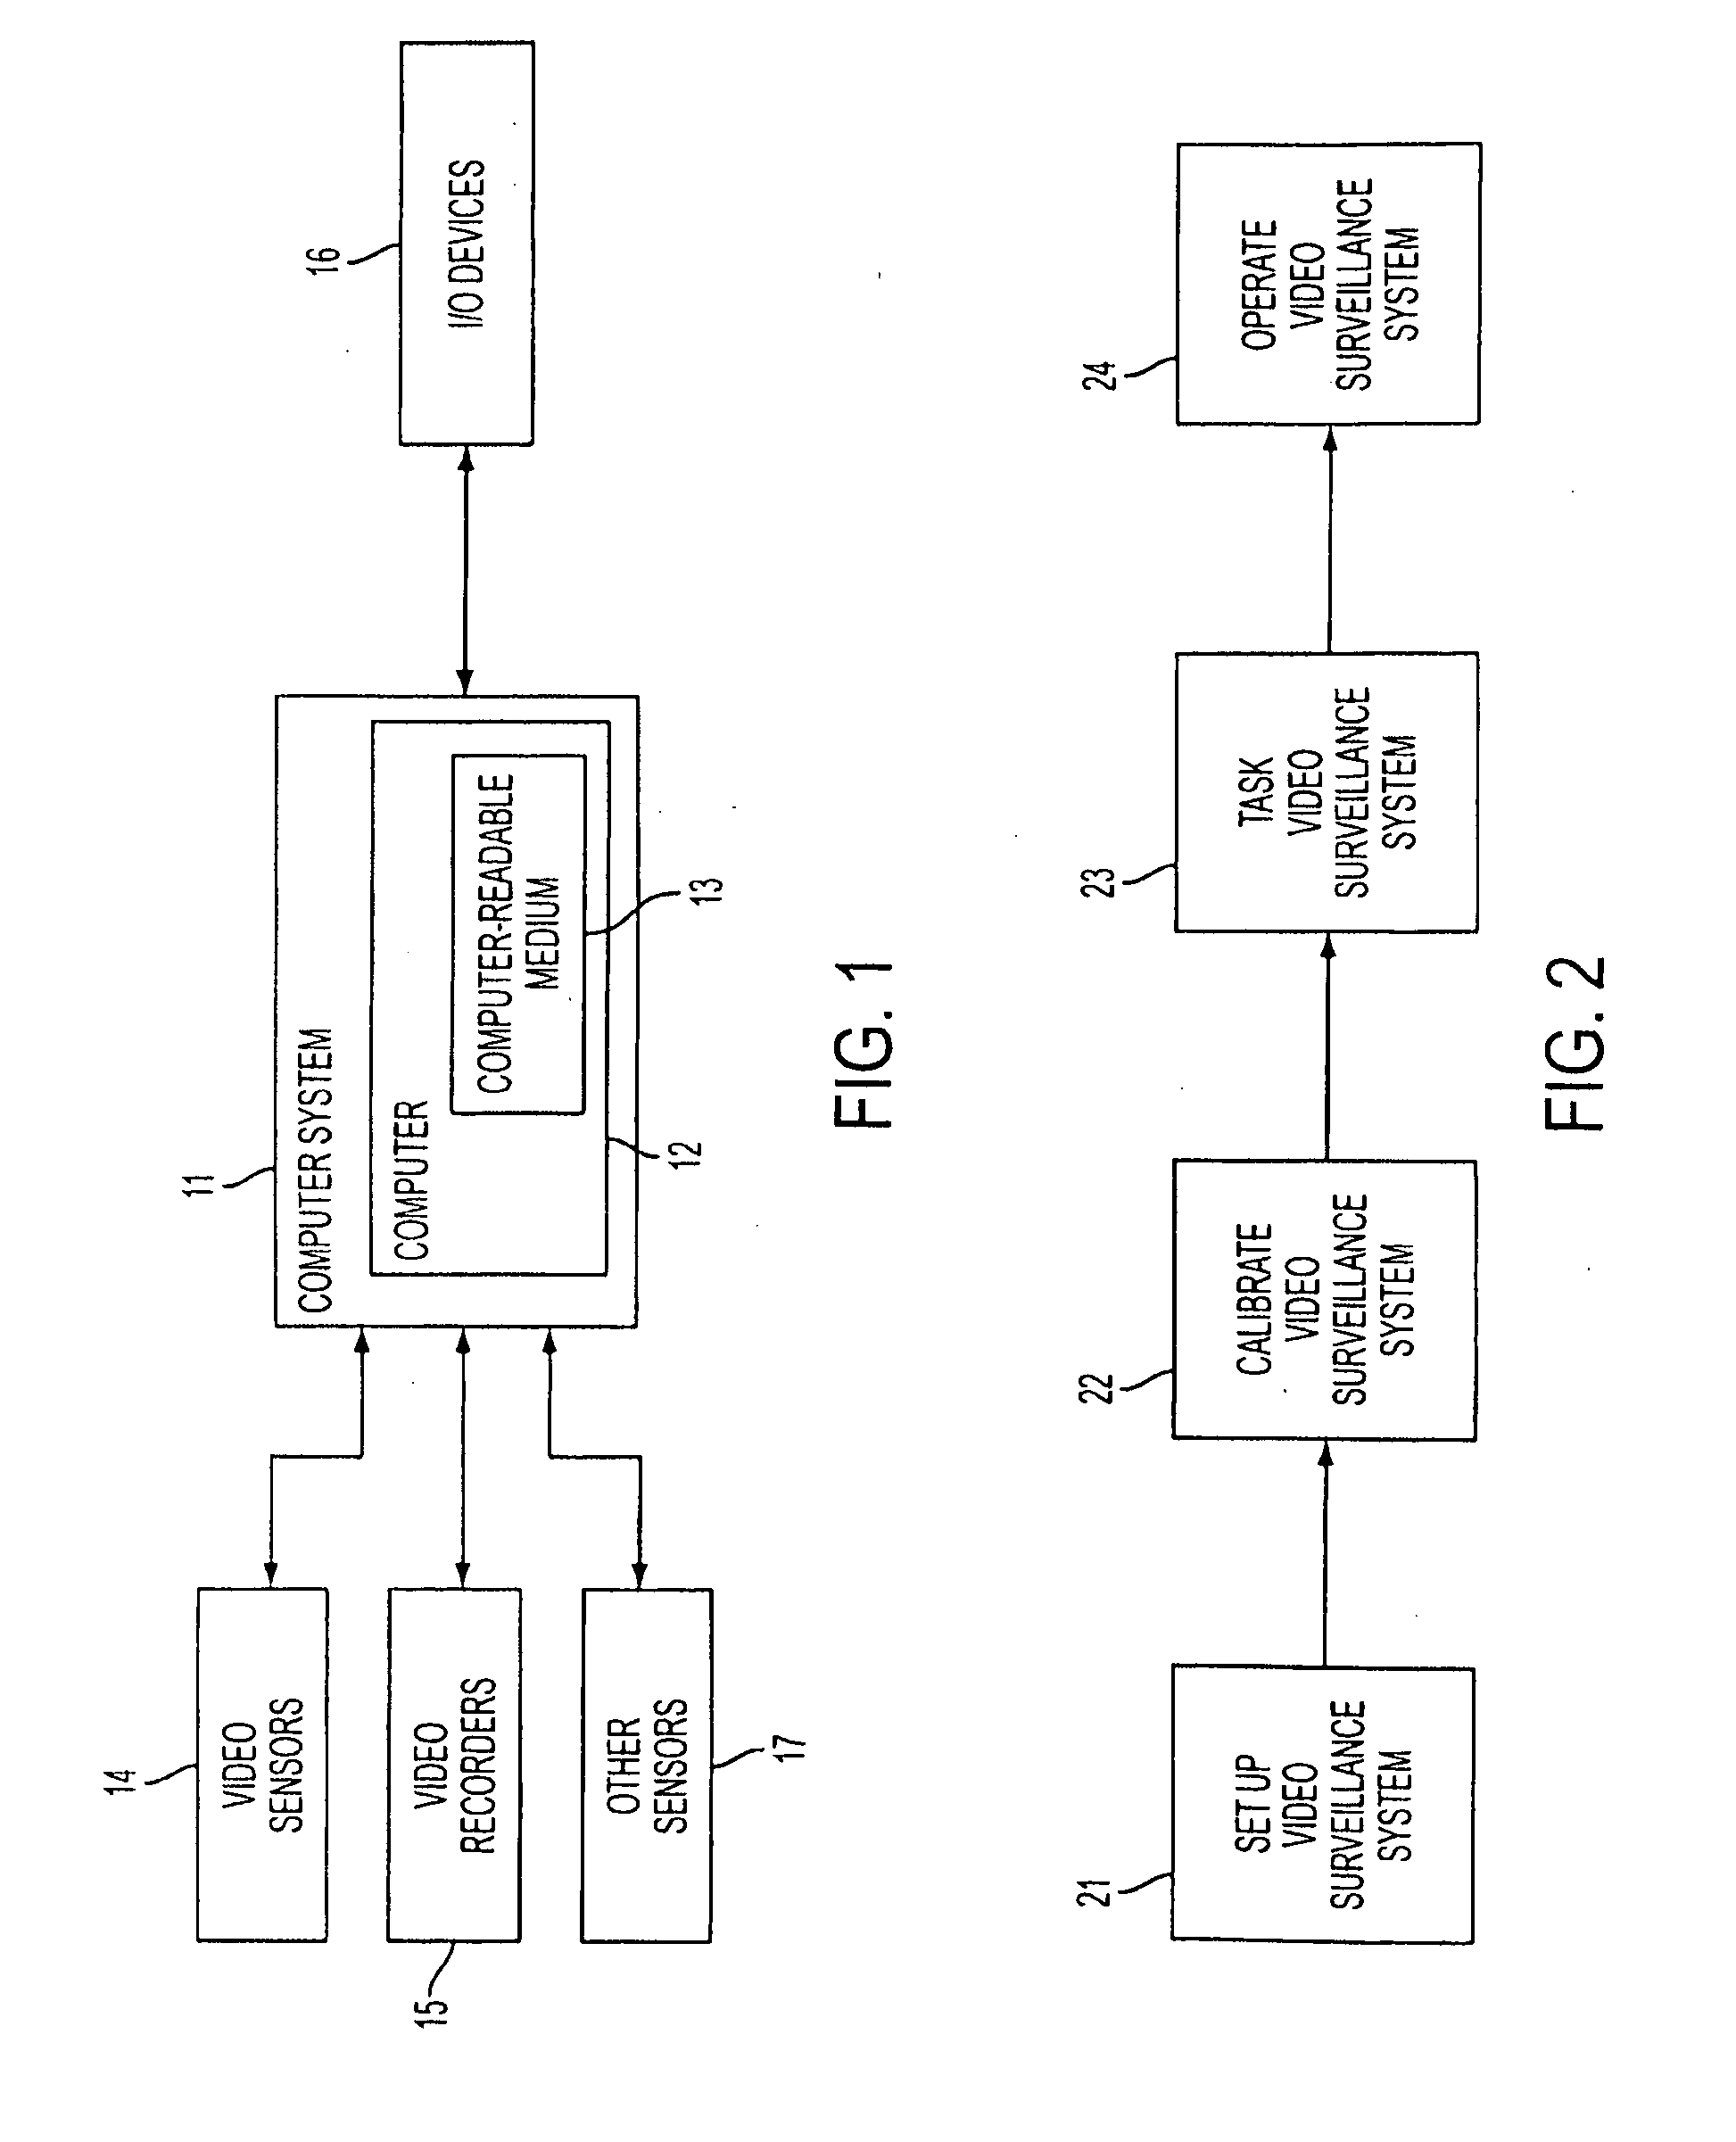 Video analytic rule detection system and method